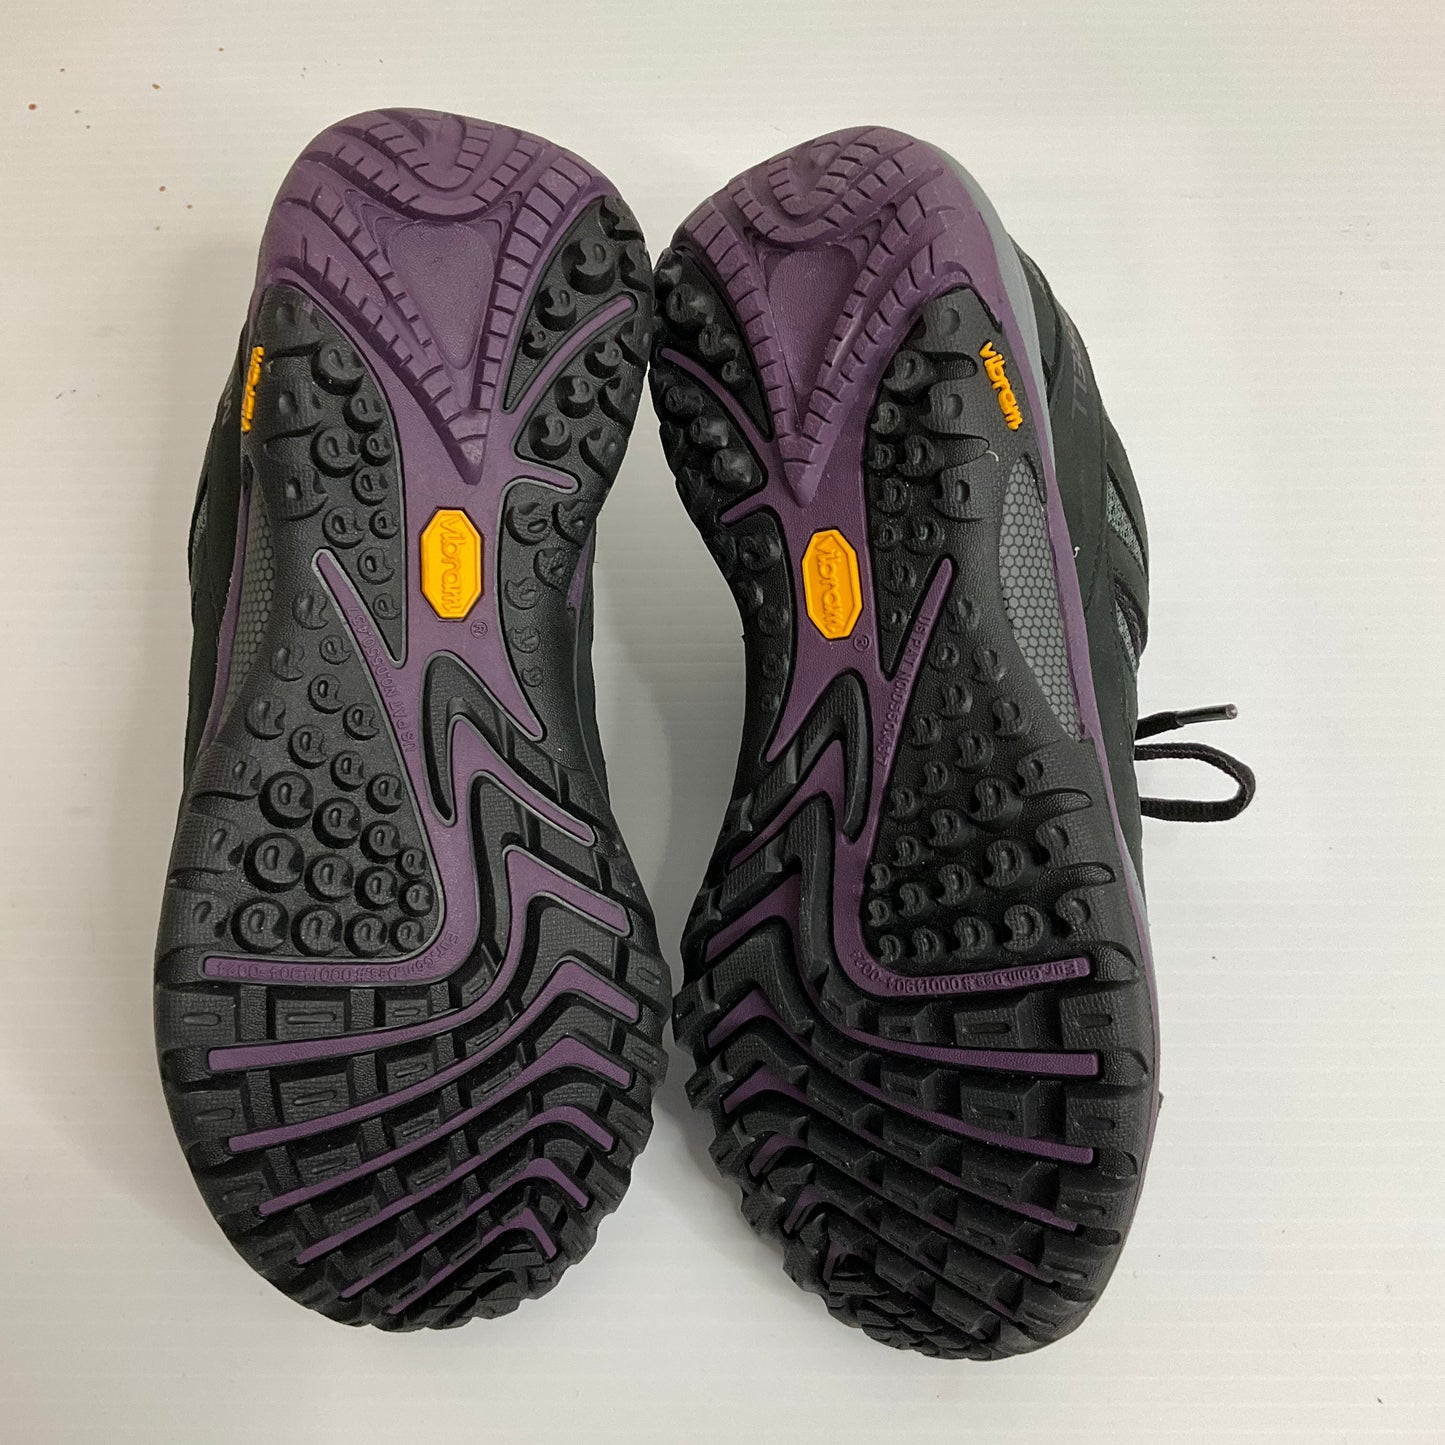 Black Shoes Athletic Merrell, Size 6.5